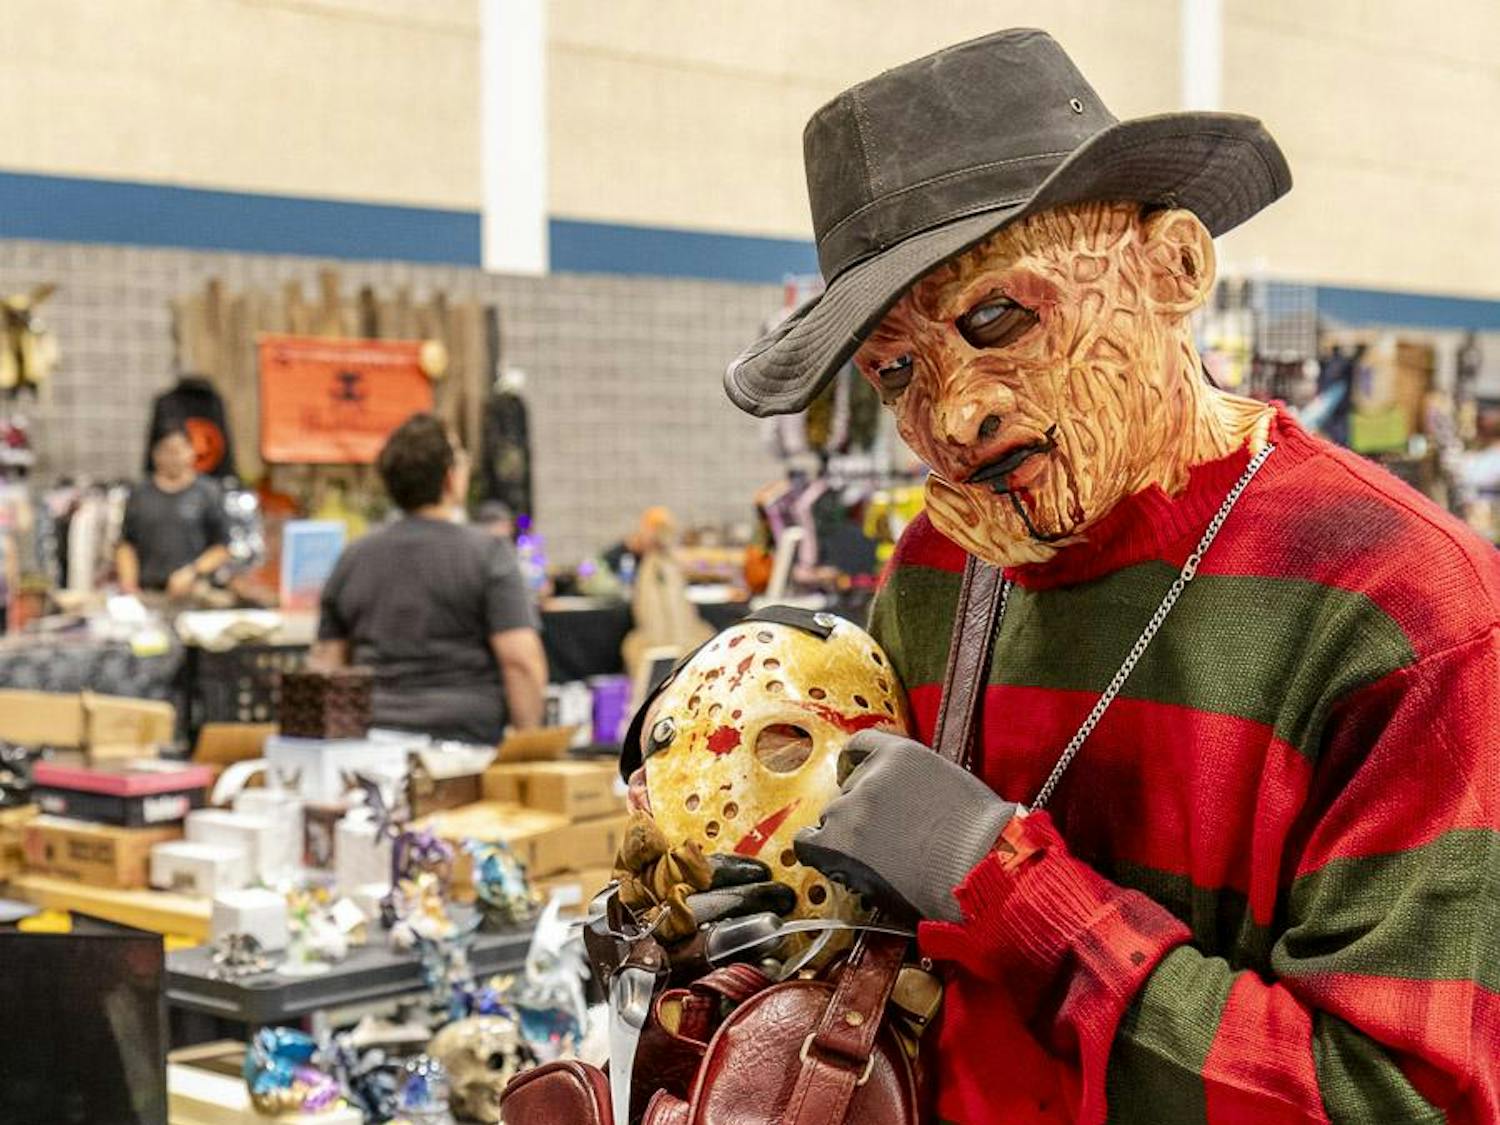 Marcus Cunningham, dressed up as Freddy Krueger, poses with a Jason Voorhees Mask in reference to the "Freddy vs. Jason" franchise during the first day of the South Carolina Horror Convention on Sept. 16, 2023. Cunningham said he plans on returning on Sept. 17, 2023, dressed up as Jason Voorhees, taking three hours prior to prepare the costume.